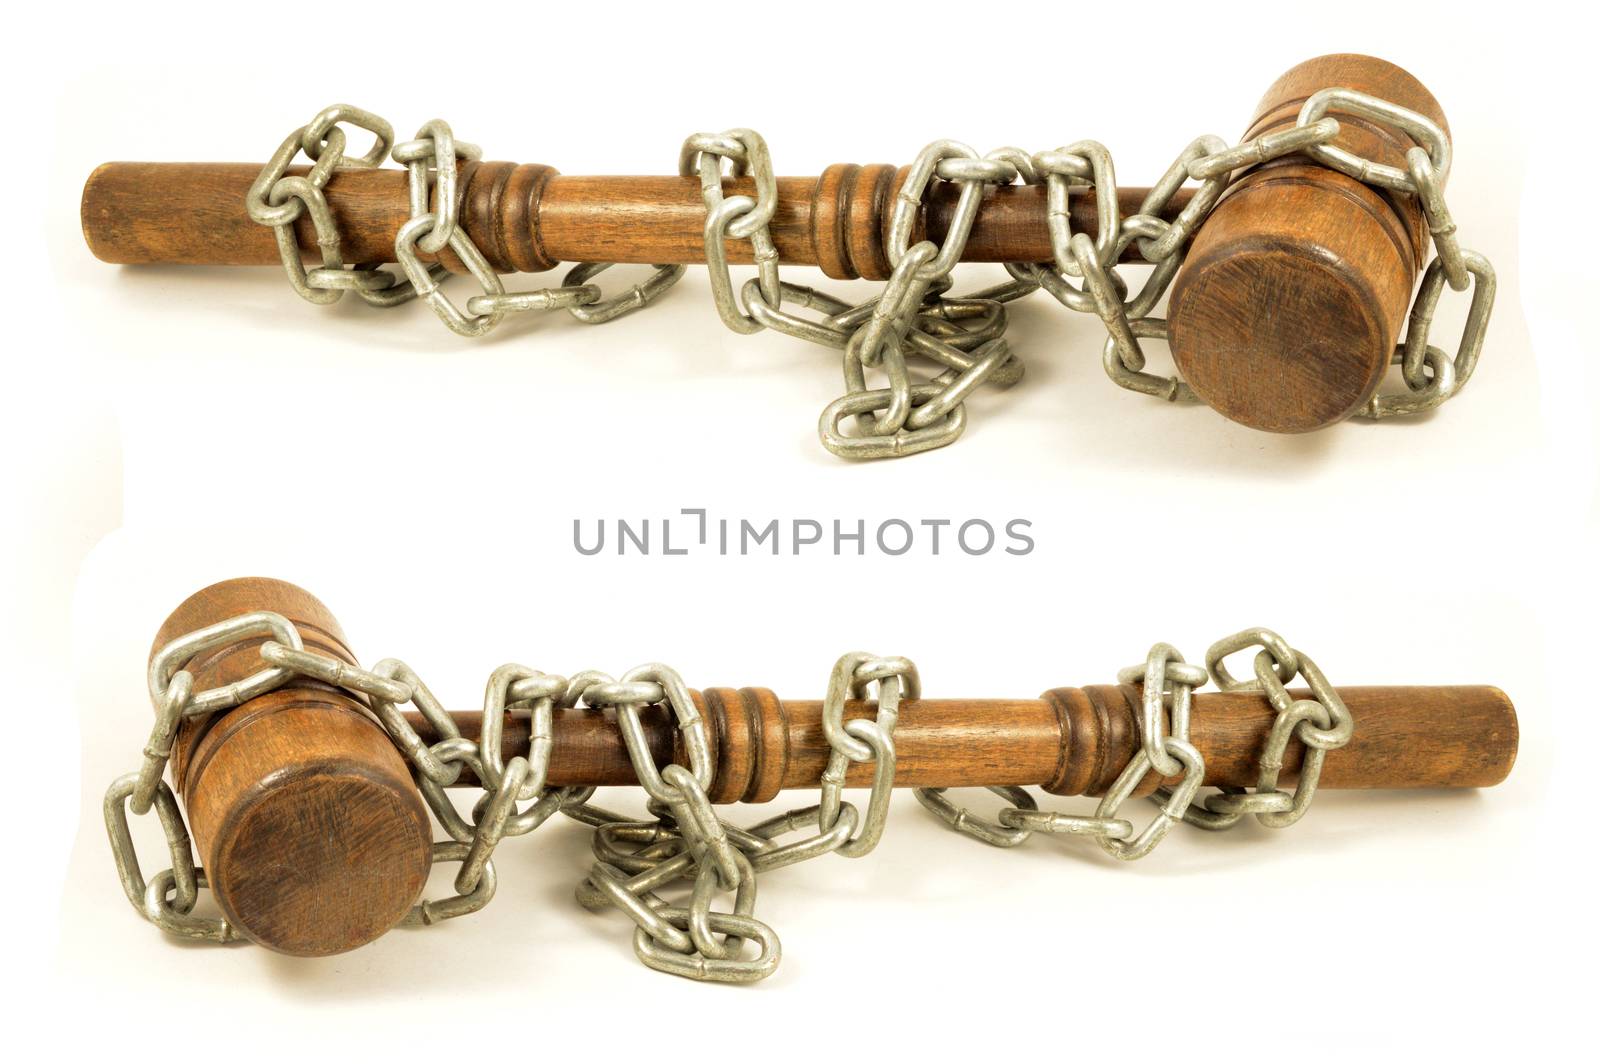 A couple of chain wrapped gavels for representing legal binding laws and policy in business.